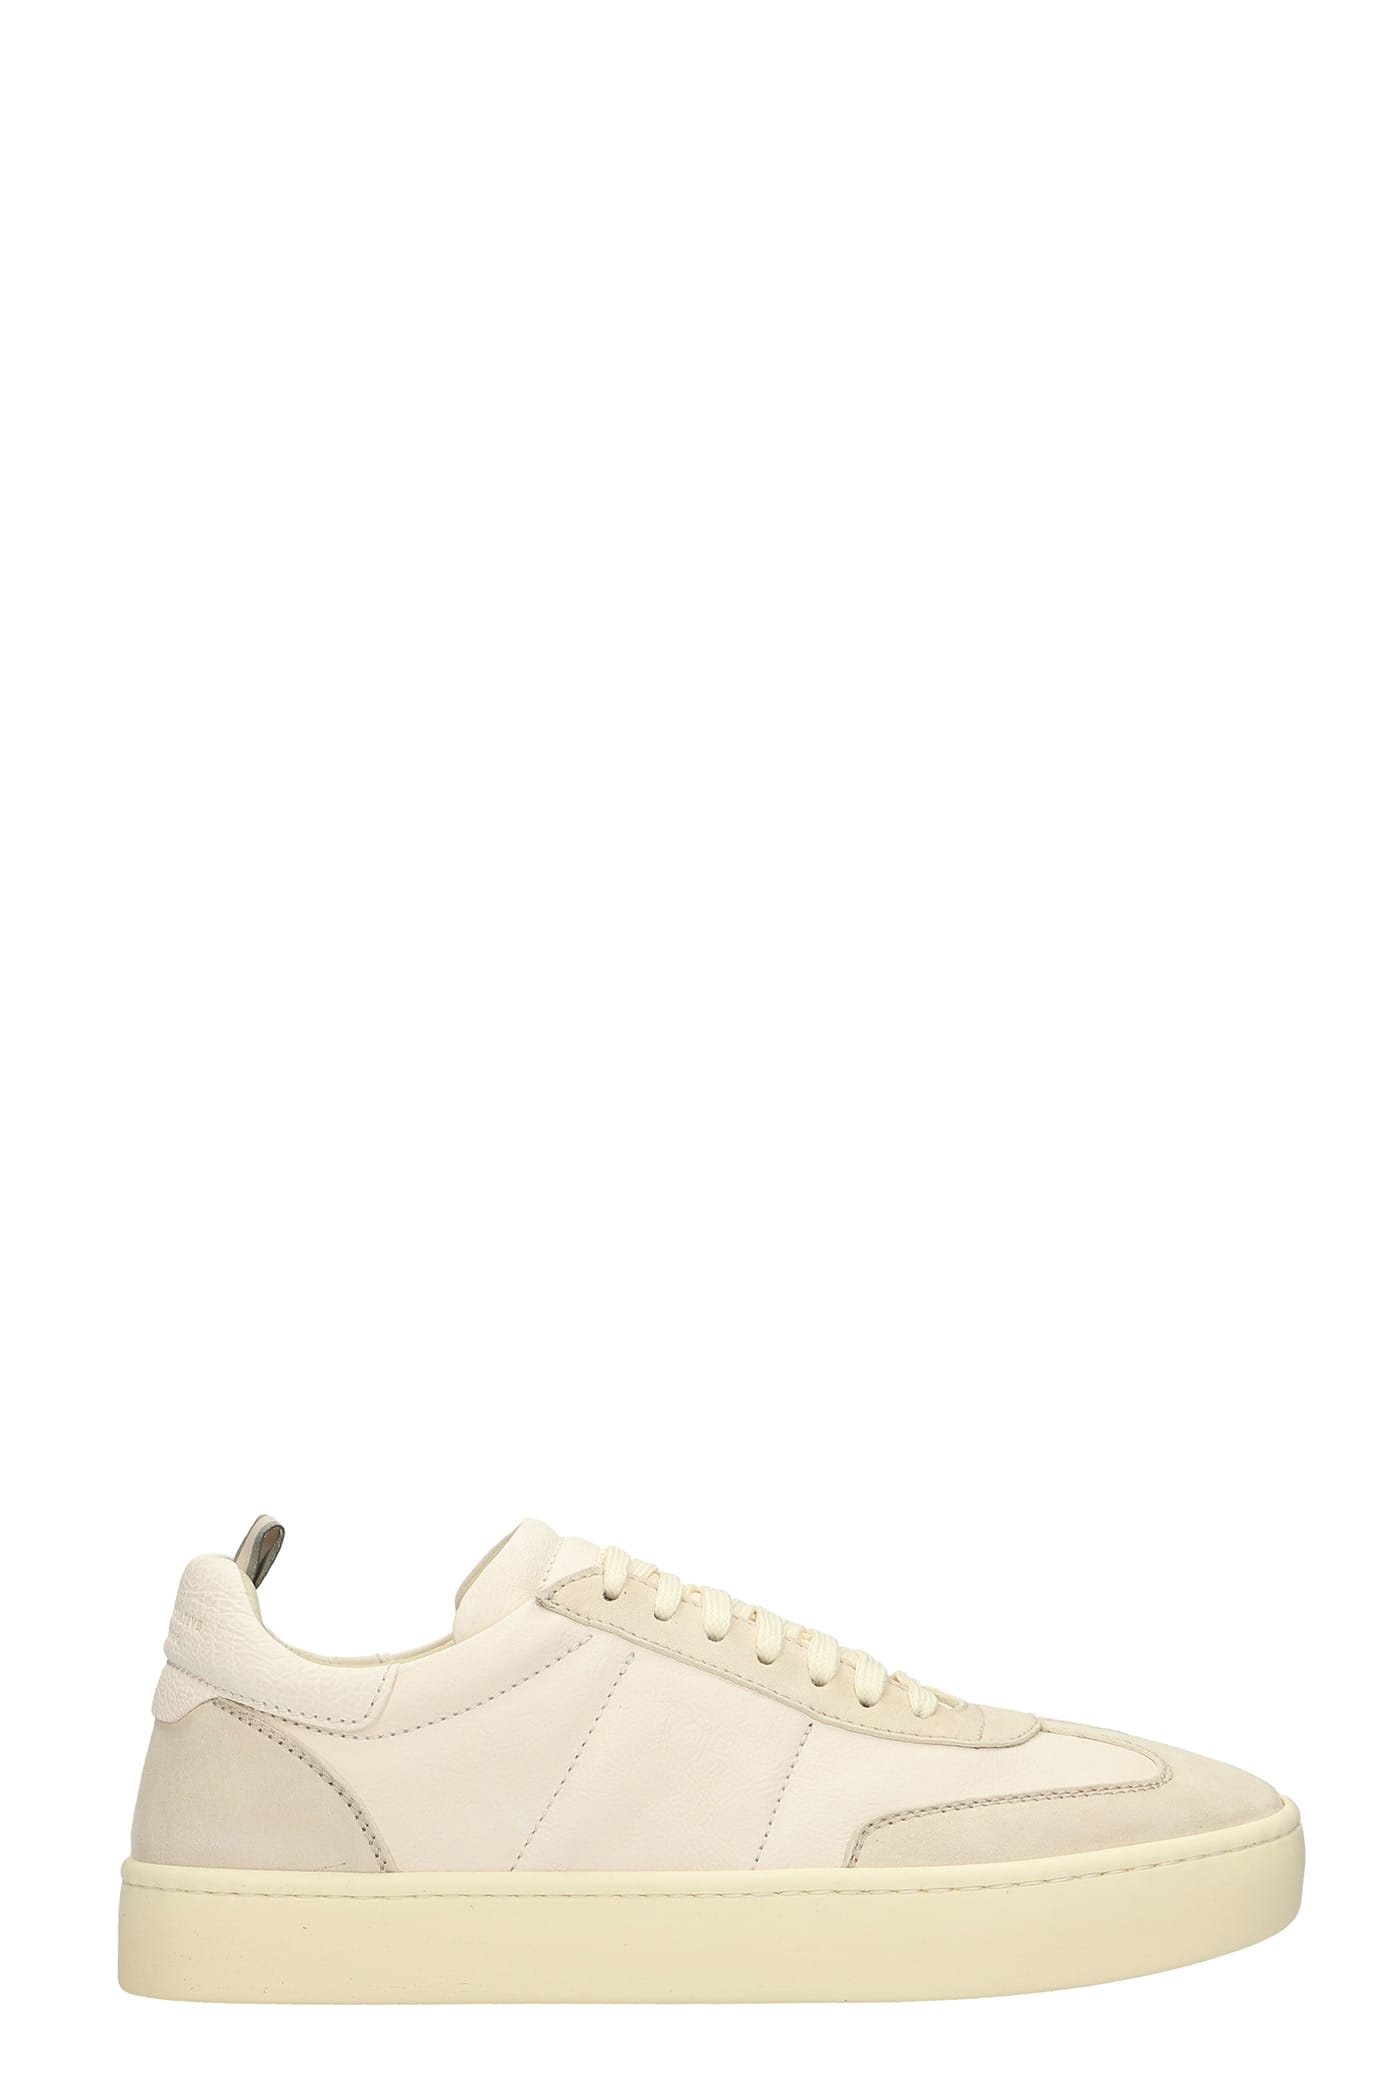 Officine Creative Sneakers In Beige Leather